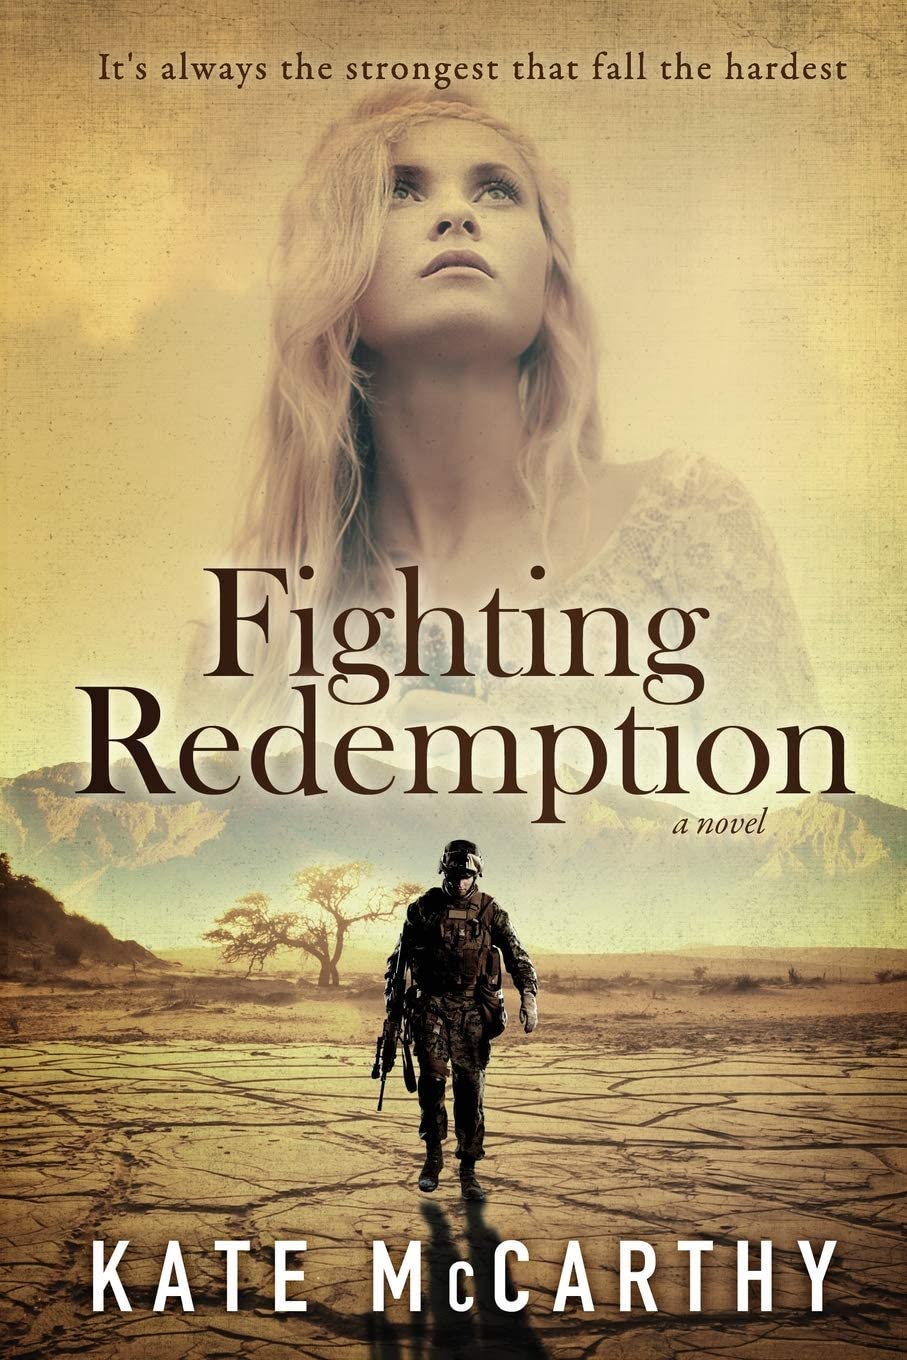 Fighting Redemption by Kate McCarthy